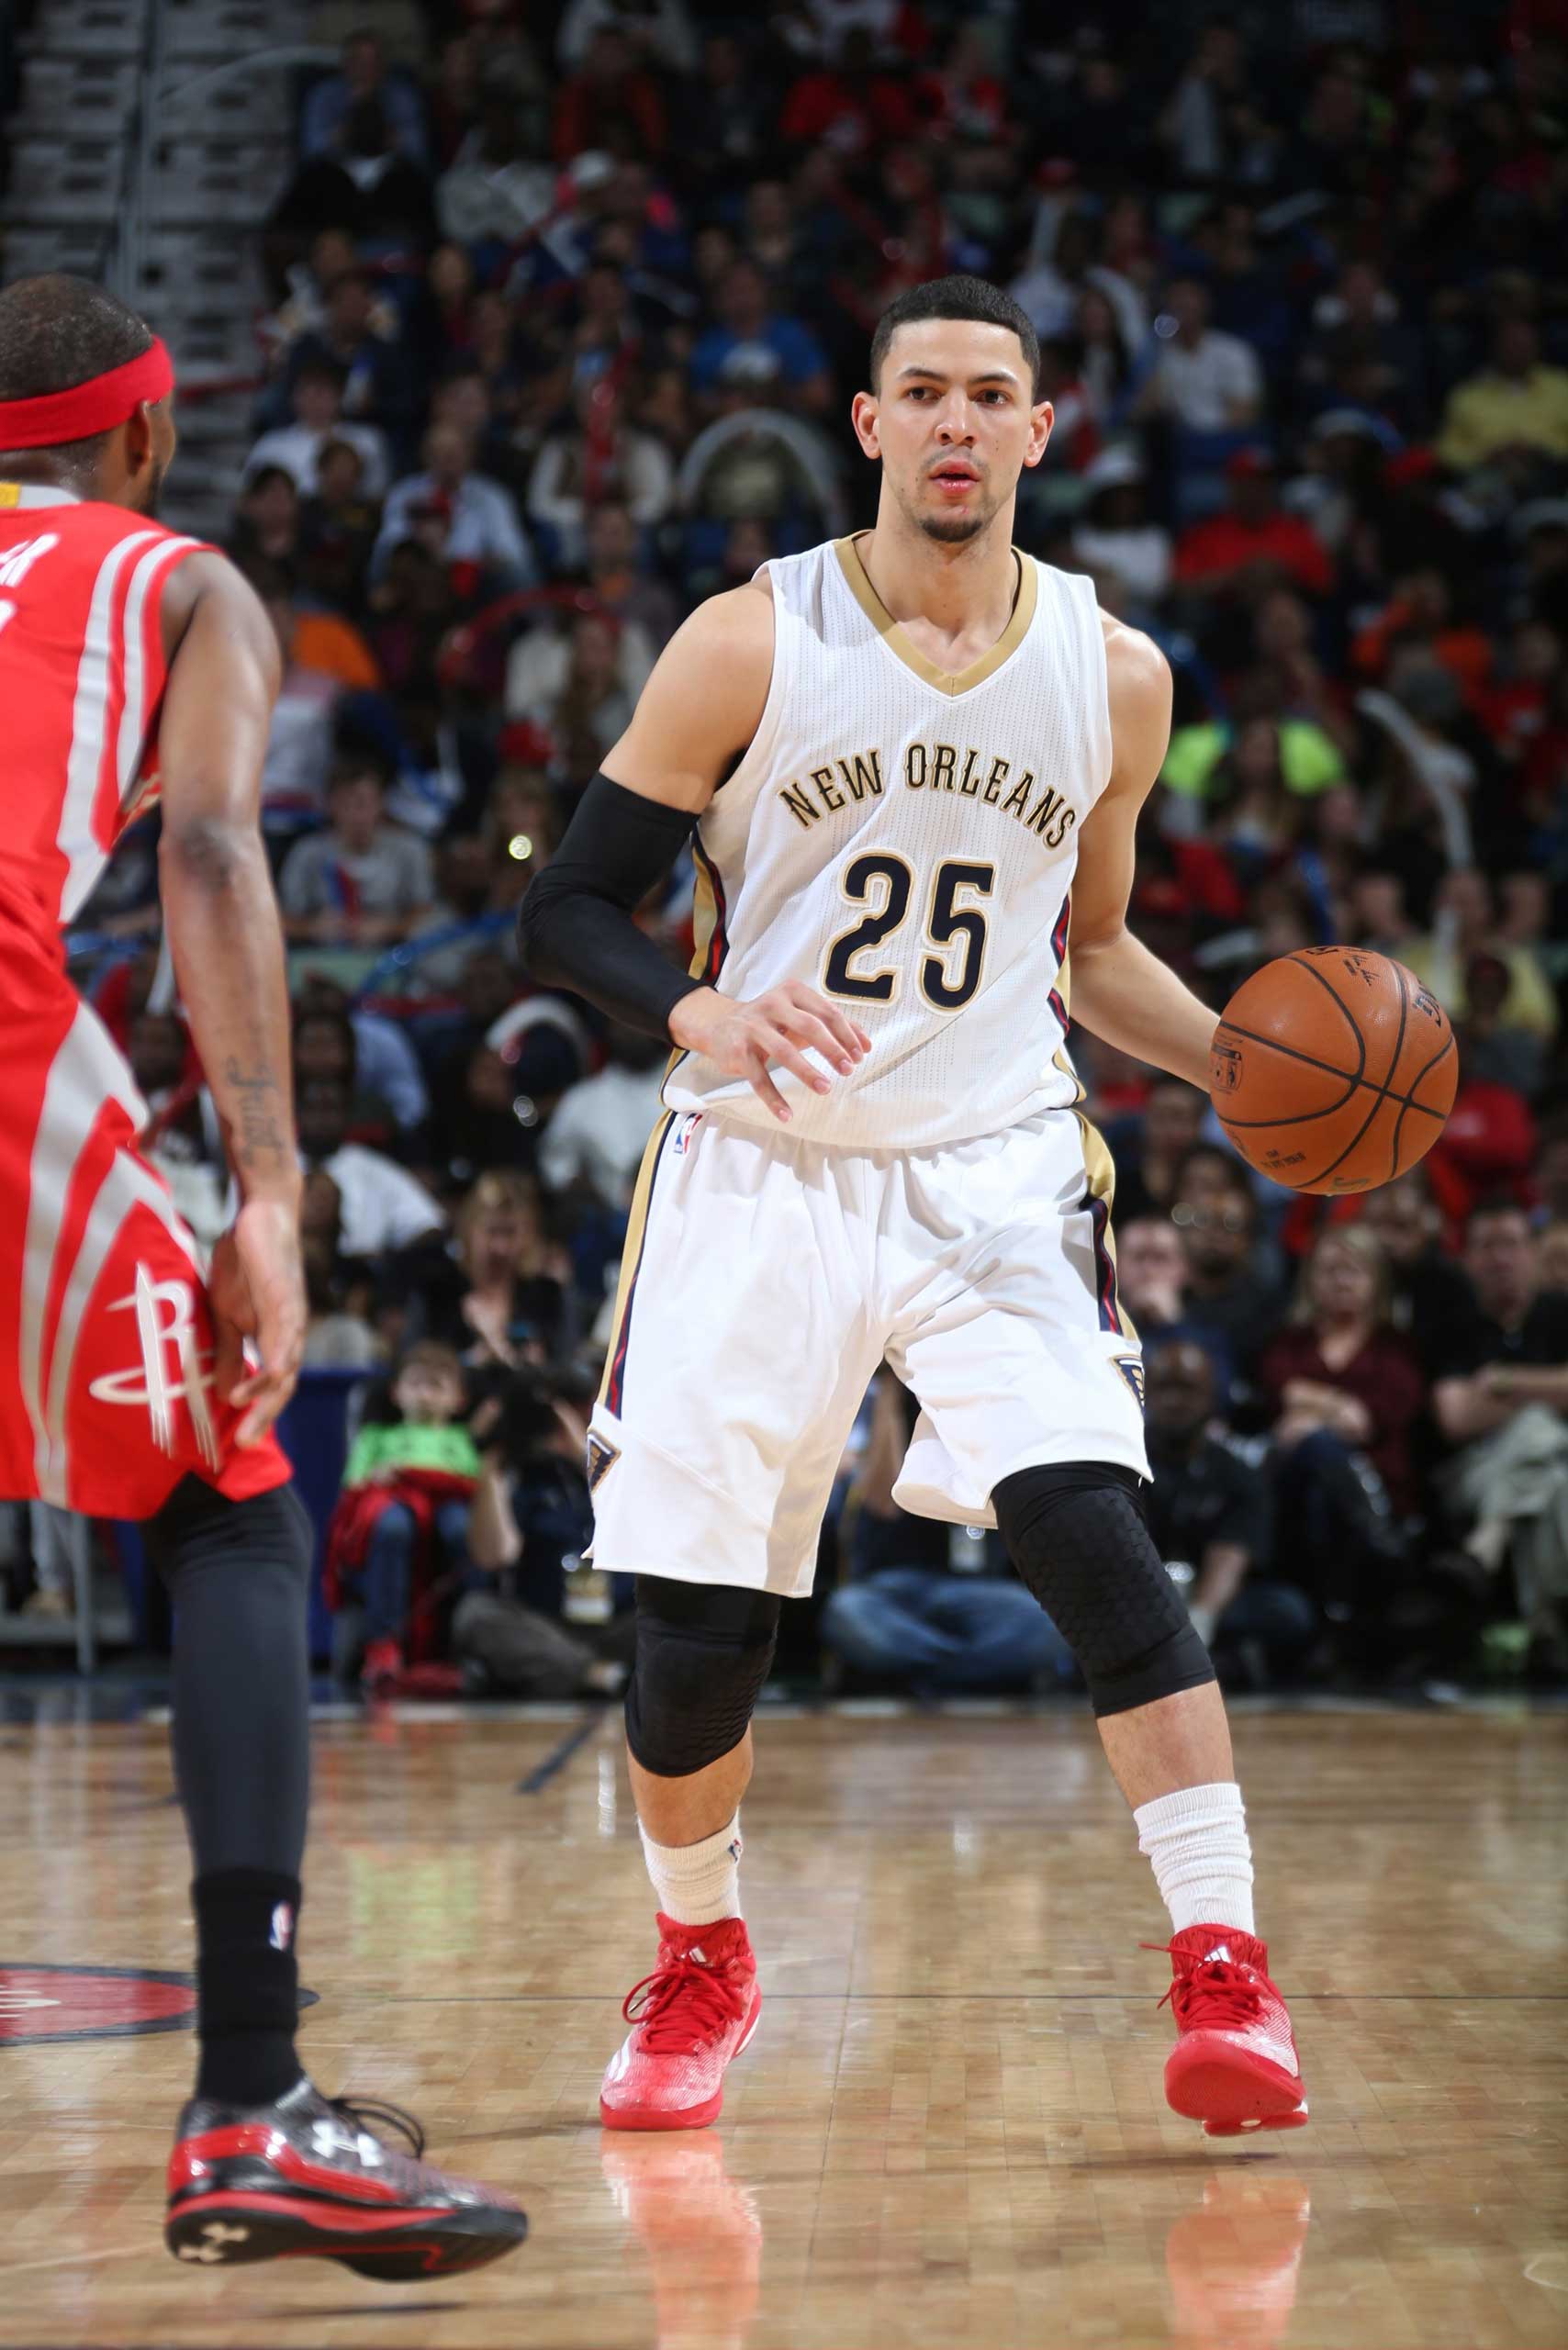 Austin Rivers of the New Orleans Pelicans handles the ball against the Houston Rockets on Jan, 2, 2015 at Smoothie King Center in New Orleans. (Layne Murdoch Jr.—NBAE/Getty Images)